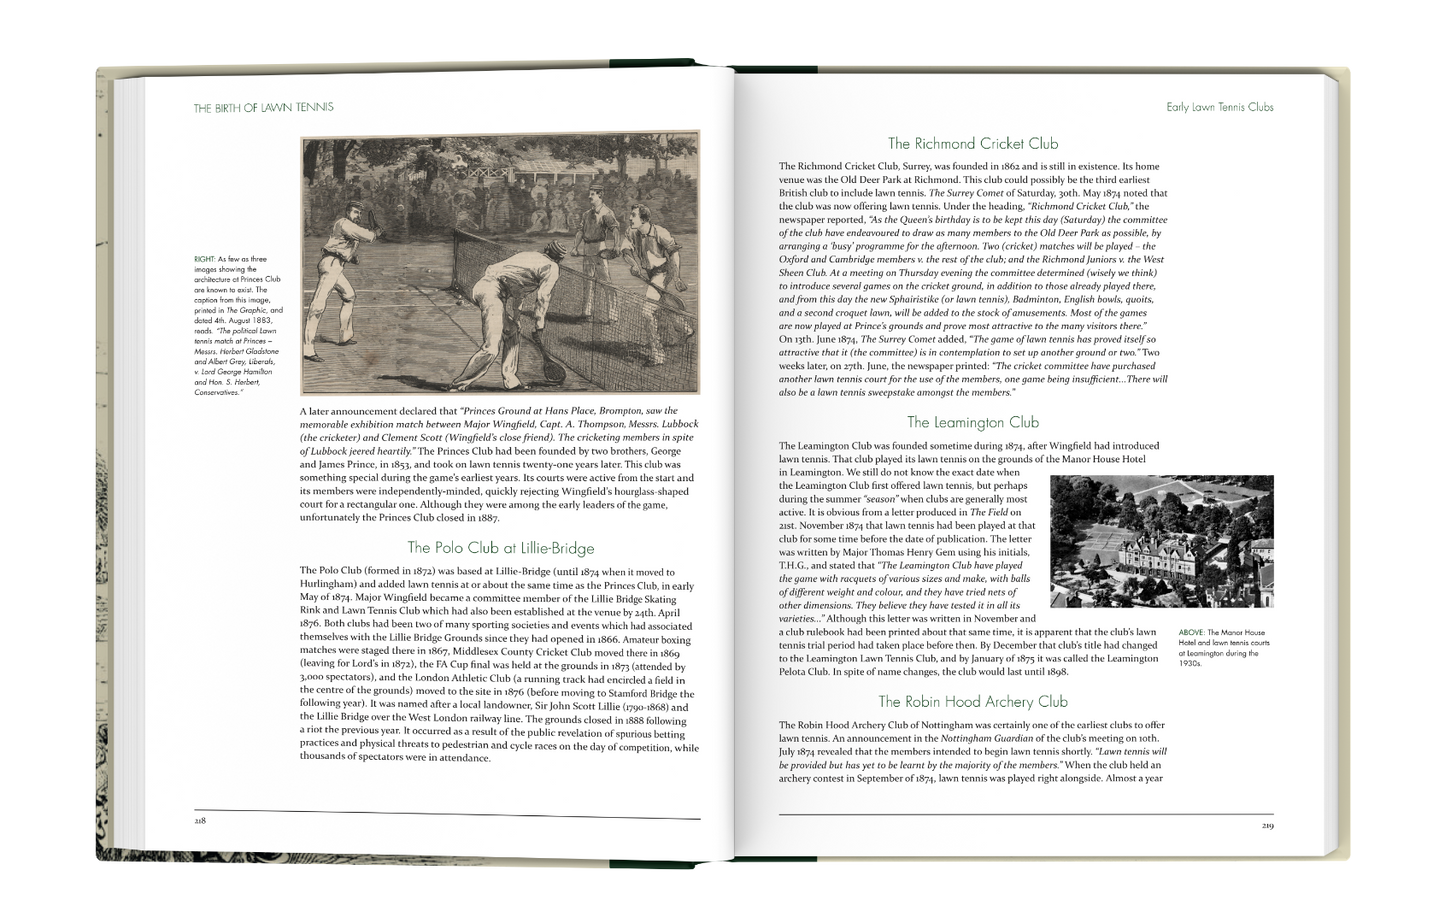 The Birth of Lawn Tennis - 2nd edition